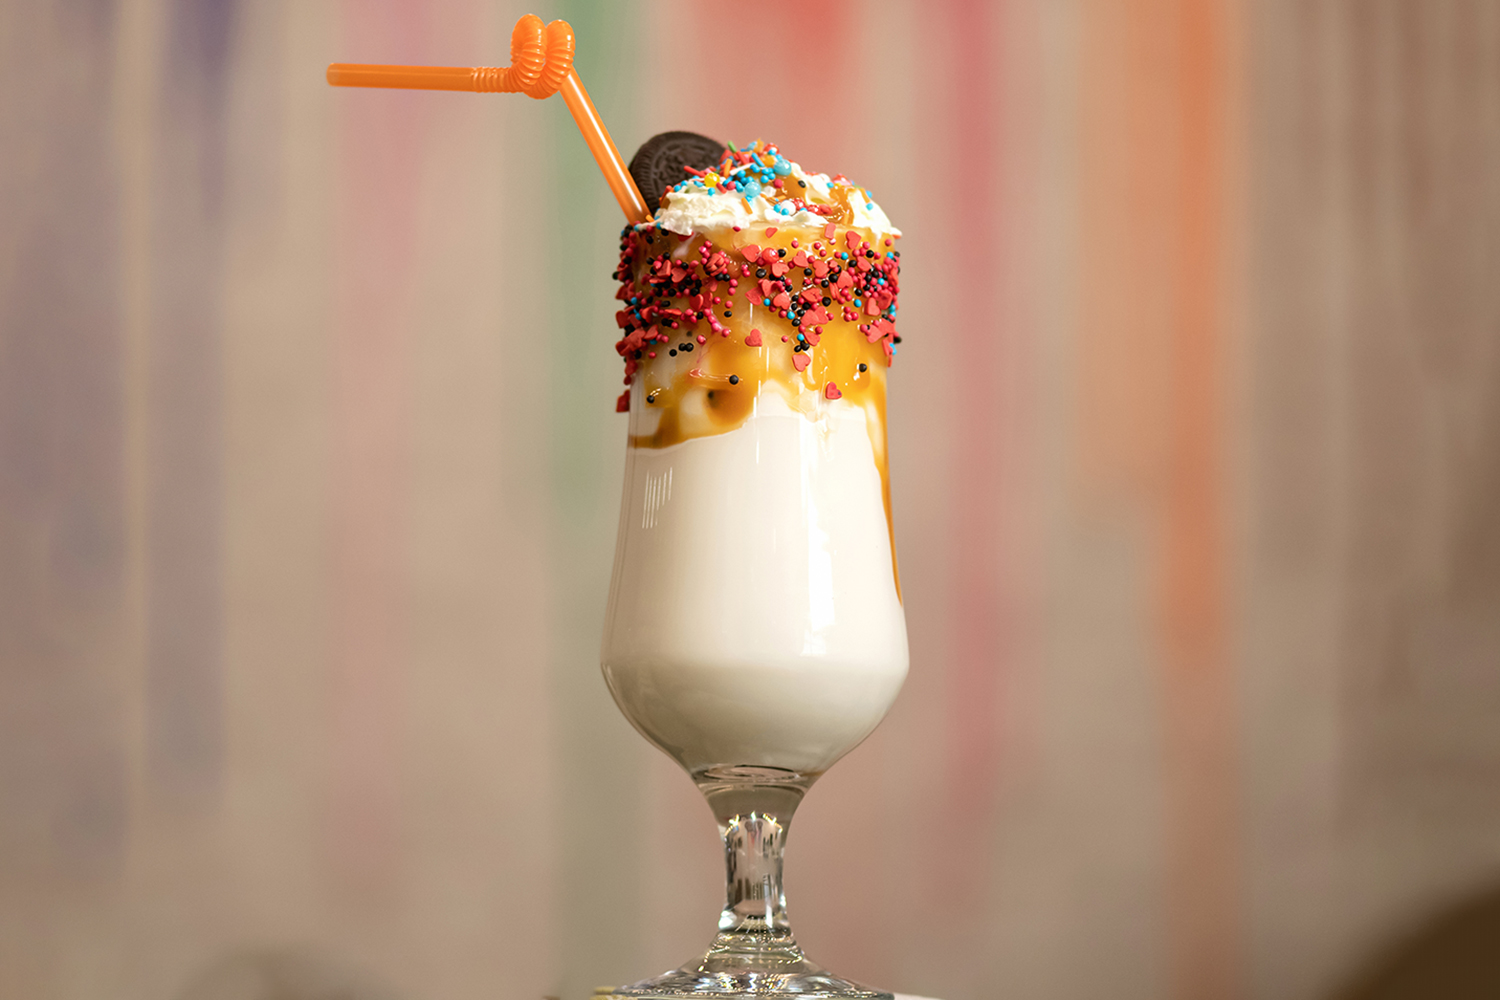 How To Make A Perfect Spiked Milkshake in 2022 - The Manual